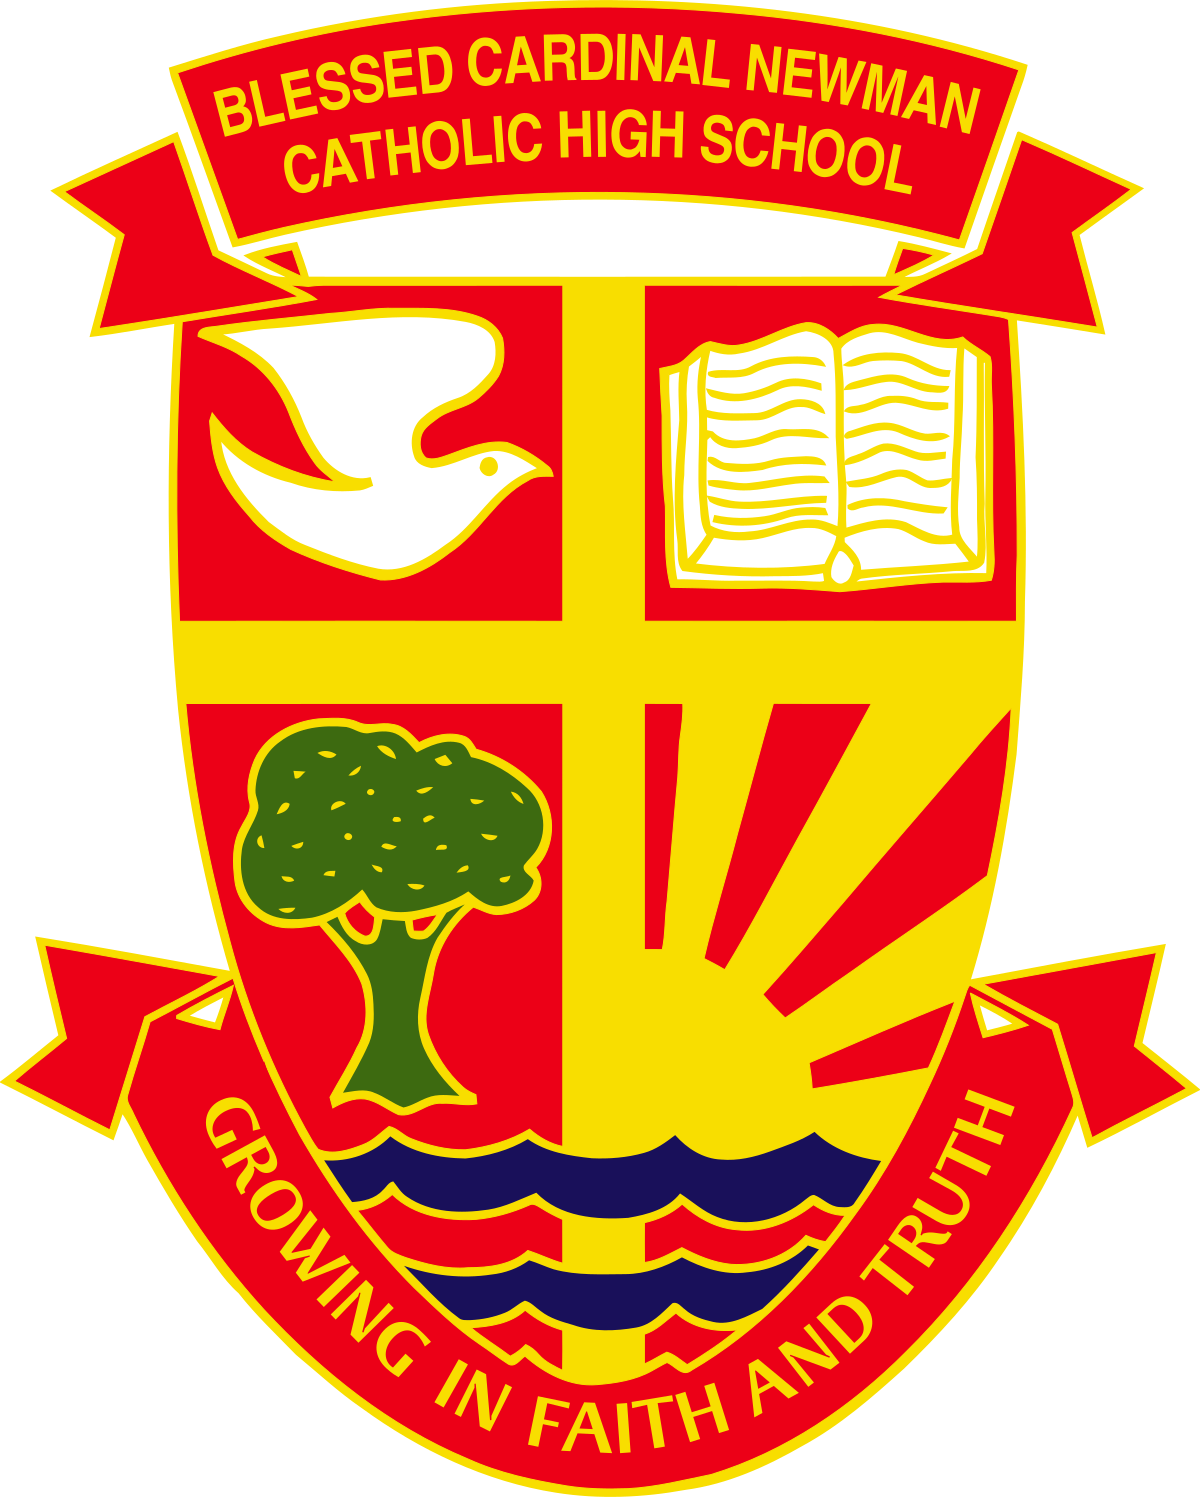 Trường Trung Học Blessed Cardinal Newman Catholic High School – Scarborough, Ontario, Canada